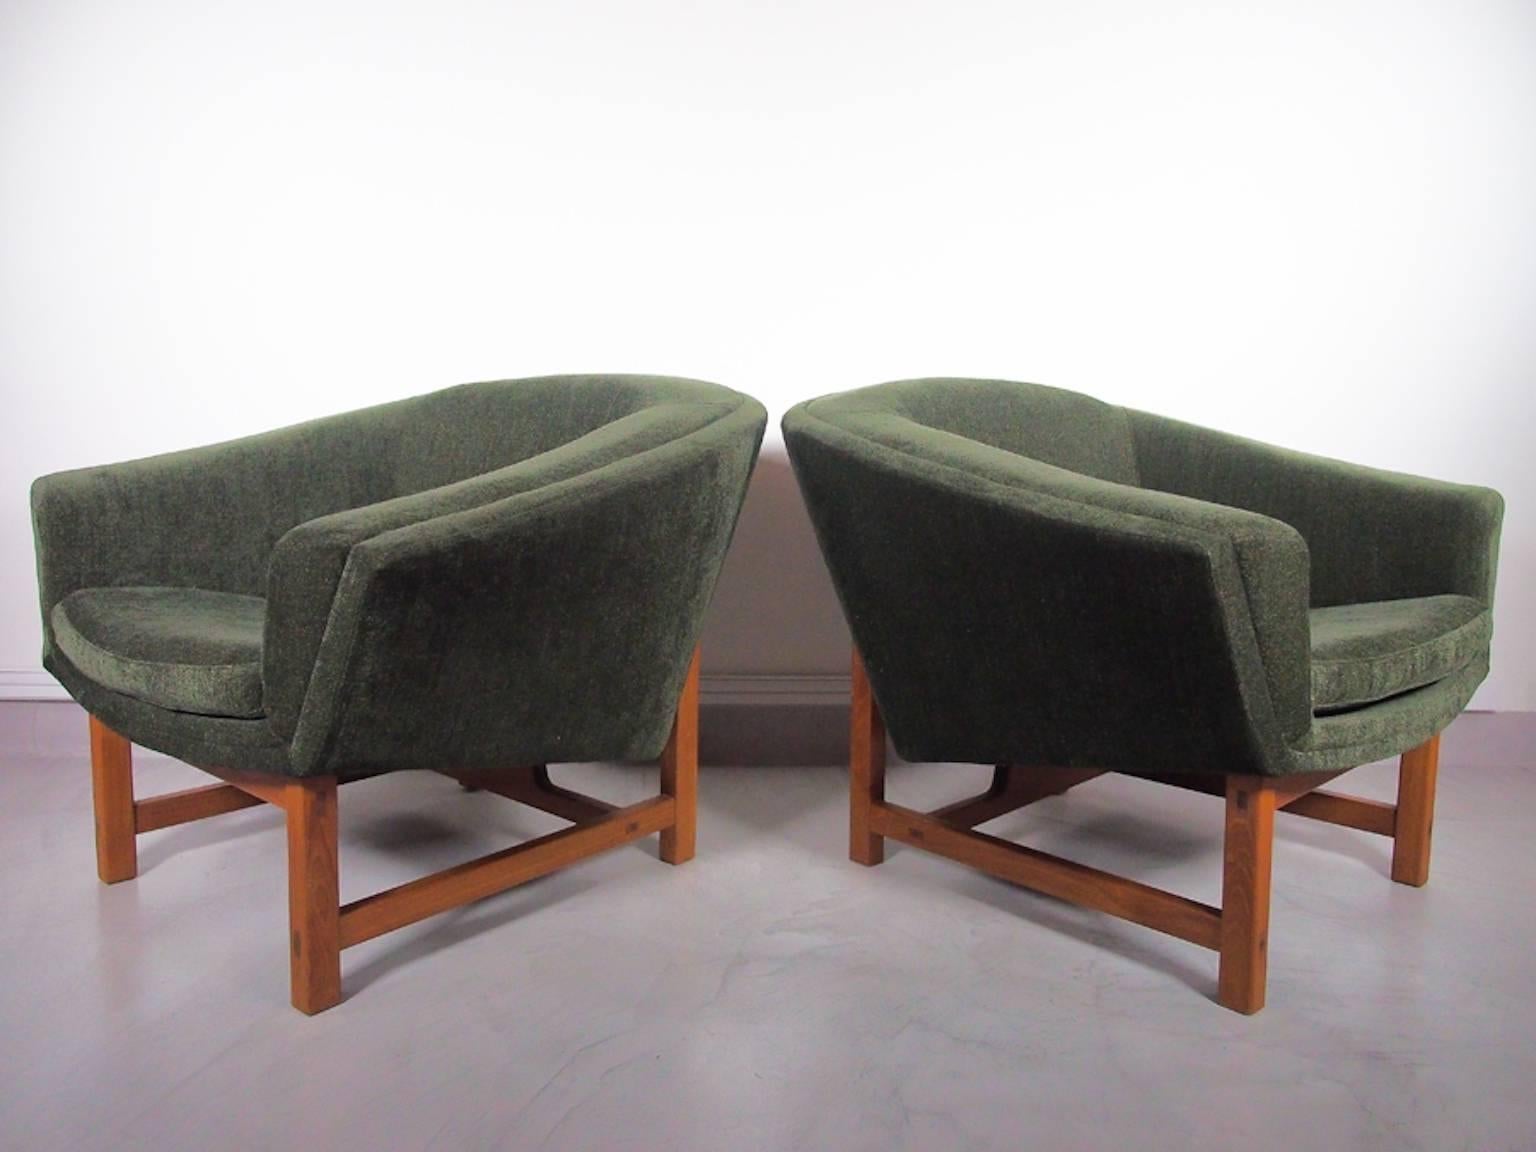 Pair of green fabric tufted armchairs by Swedish furniture designer Lennart Bender for Ulferts Möbler, model Corona. Original upholstery, leather buttons, solid teak frame.